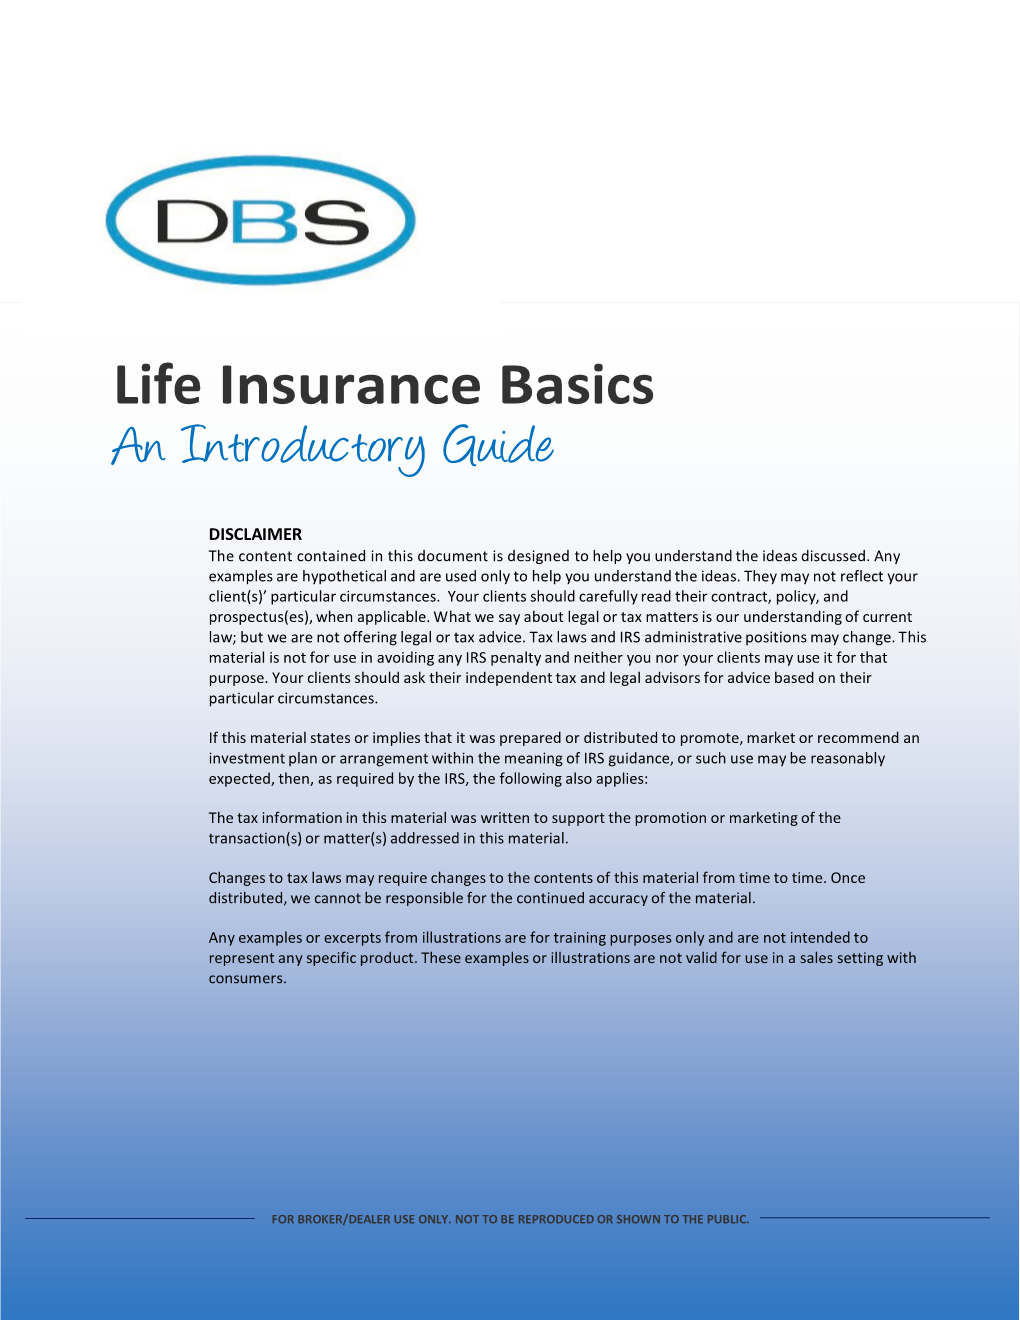 Life Insurance Basics an Introductory Guide